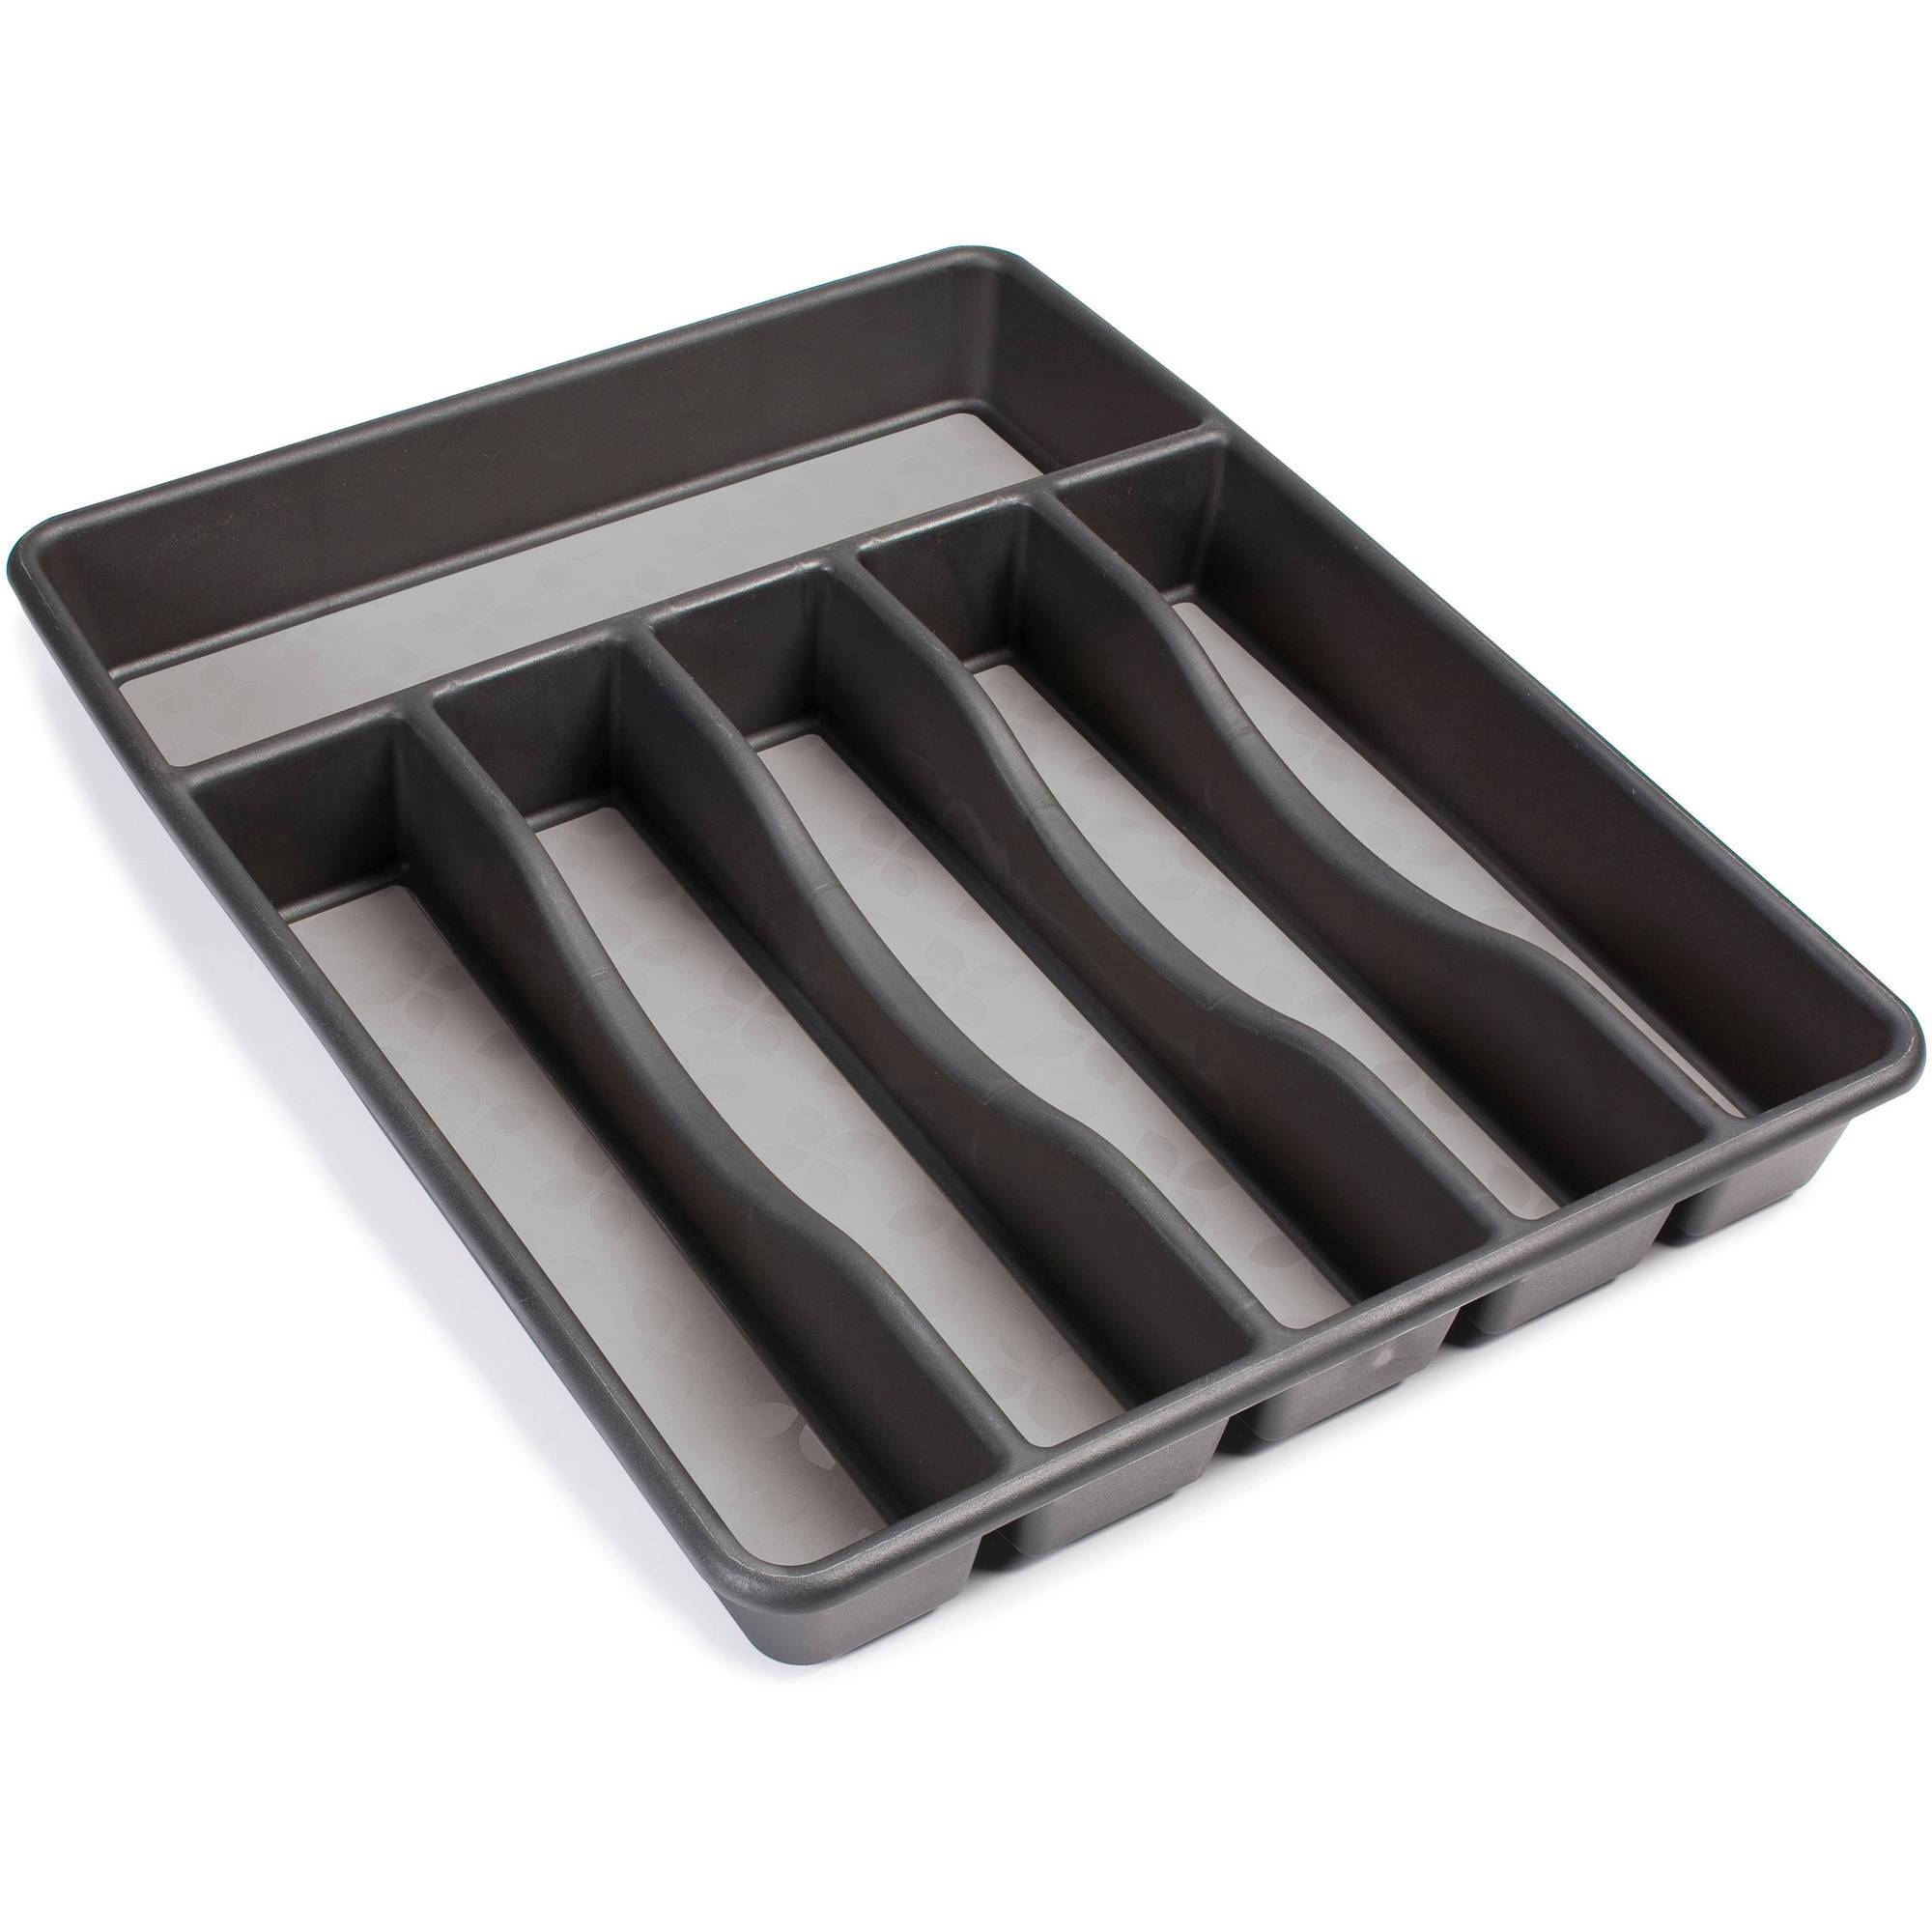 Rubbermaid Large Cutlery Tray, Grey - Whole and All